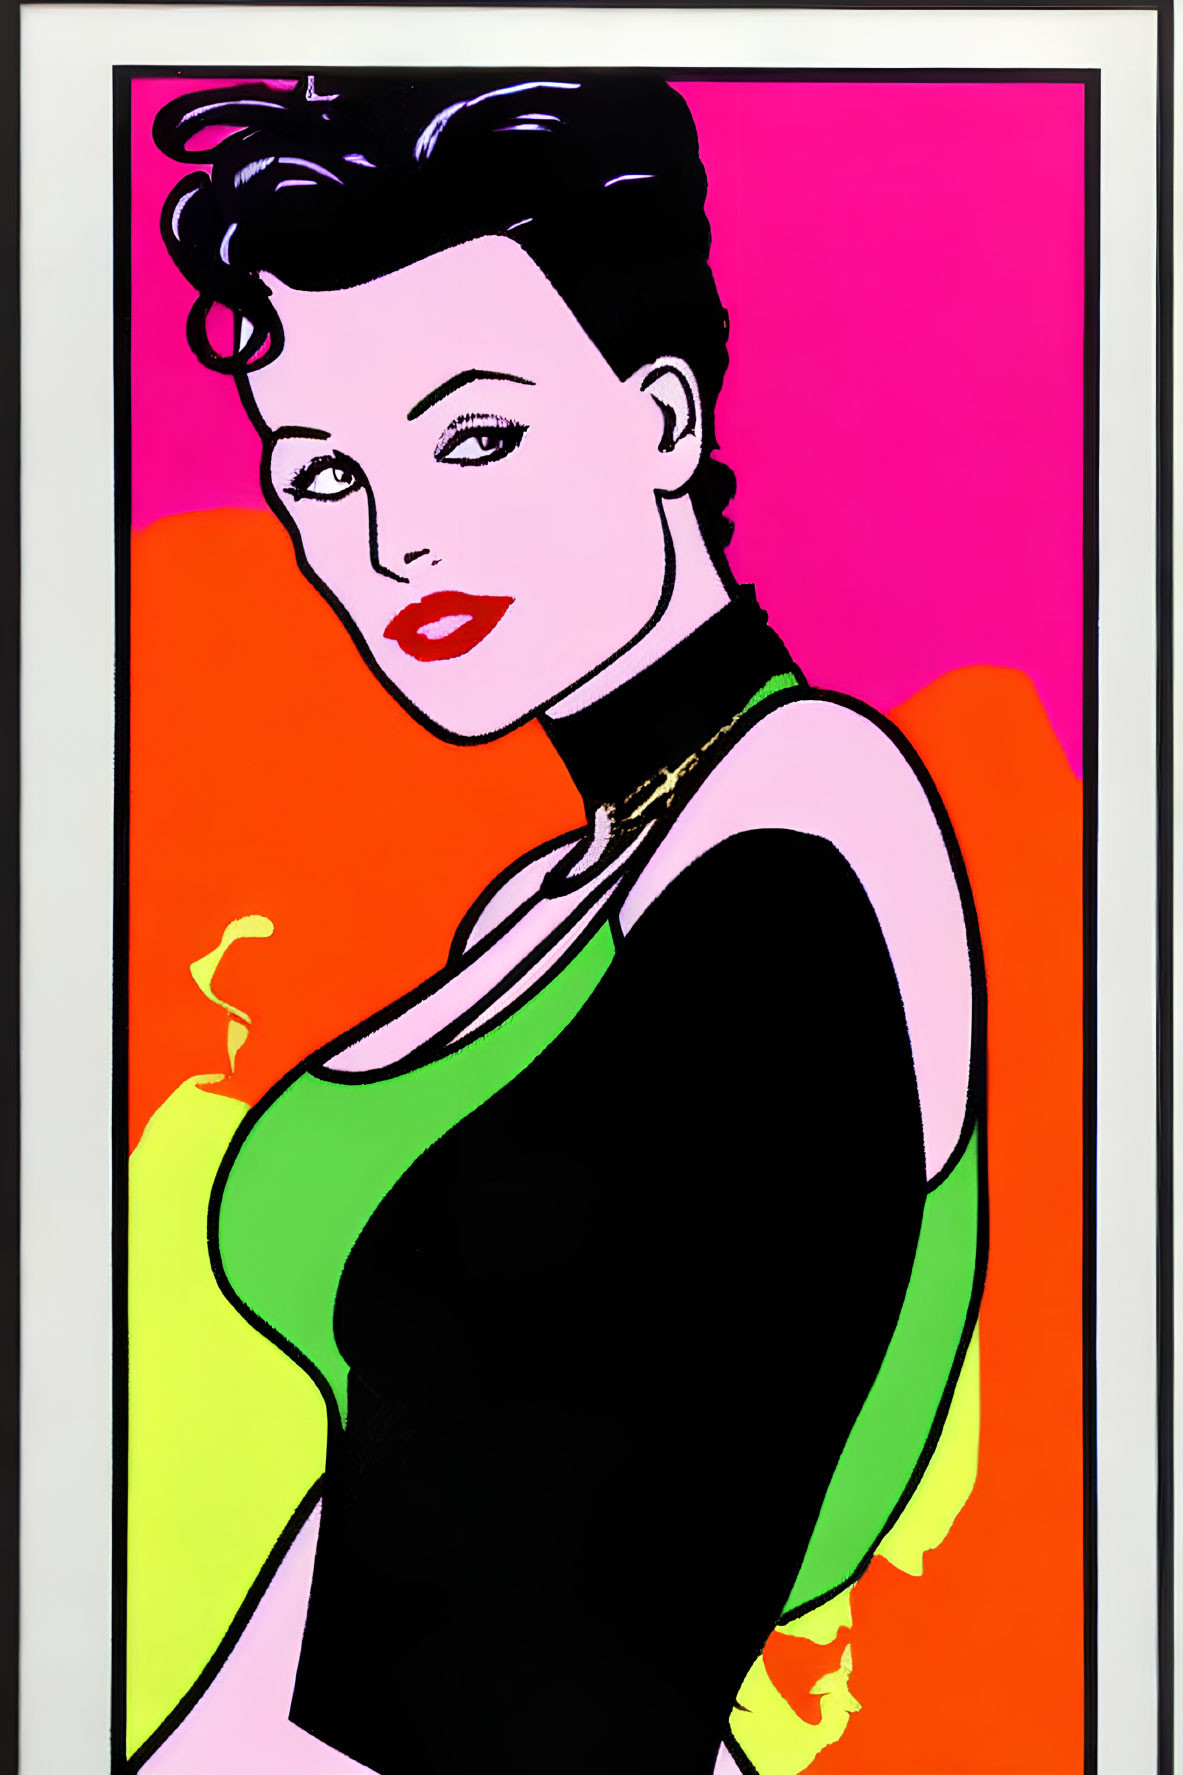 Colorful Pop Art Style Portrait of Woman with Bold Outlines